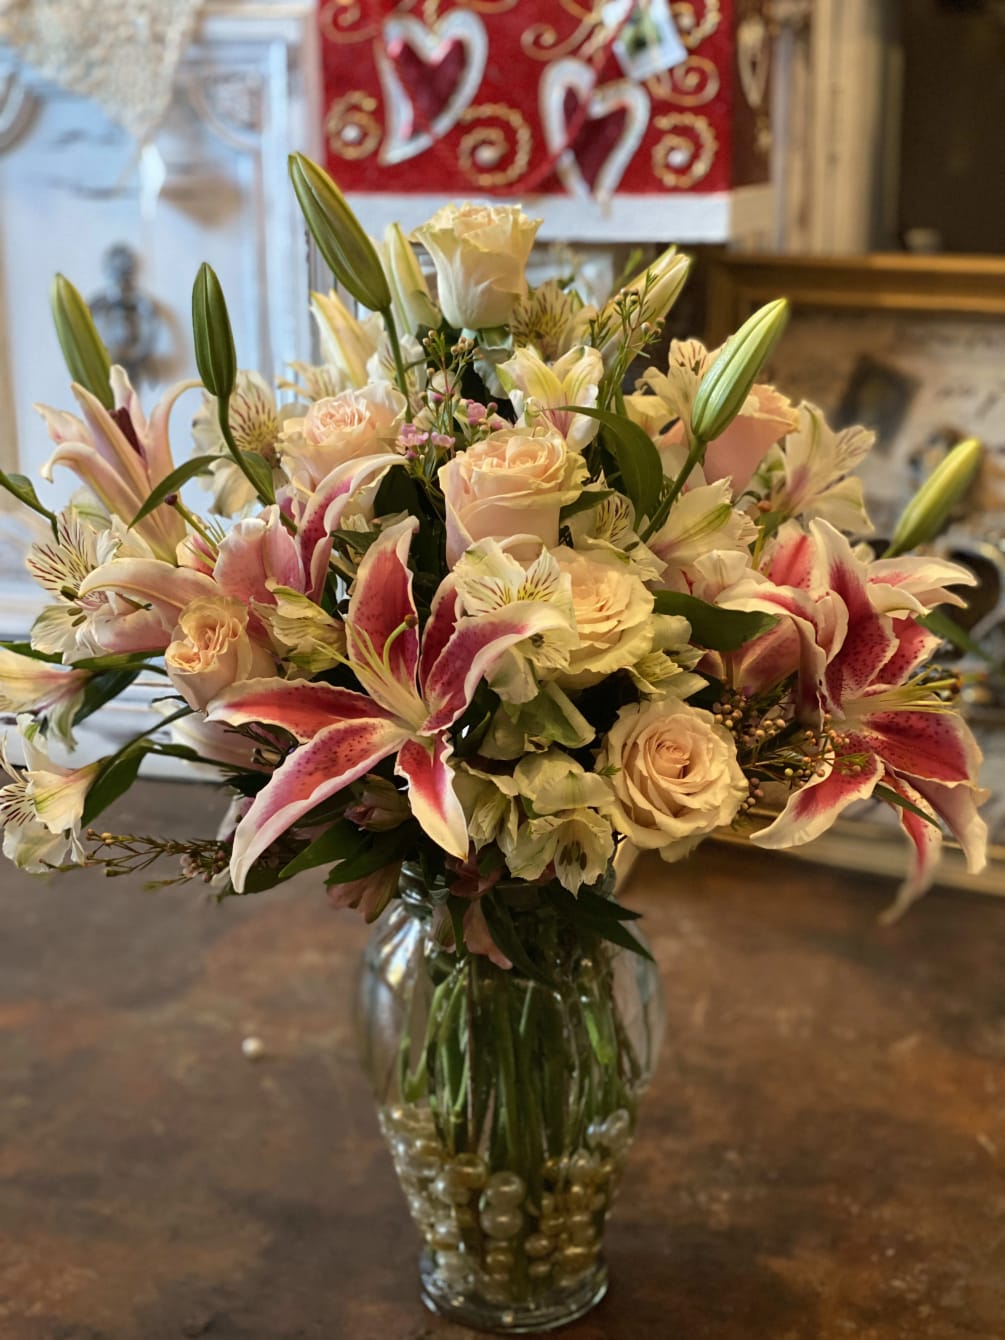 This romantic arrangement of stargazer lilies and pink roses will help to